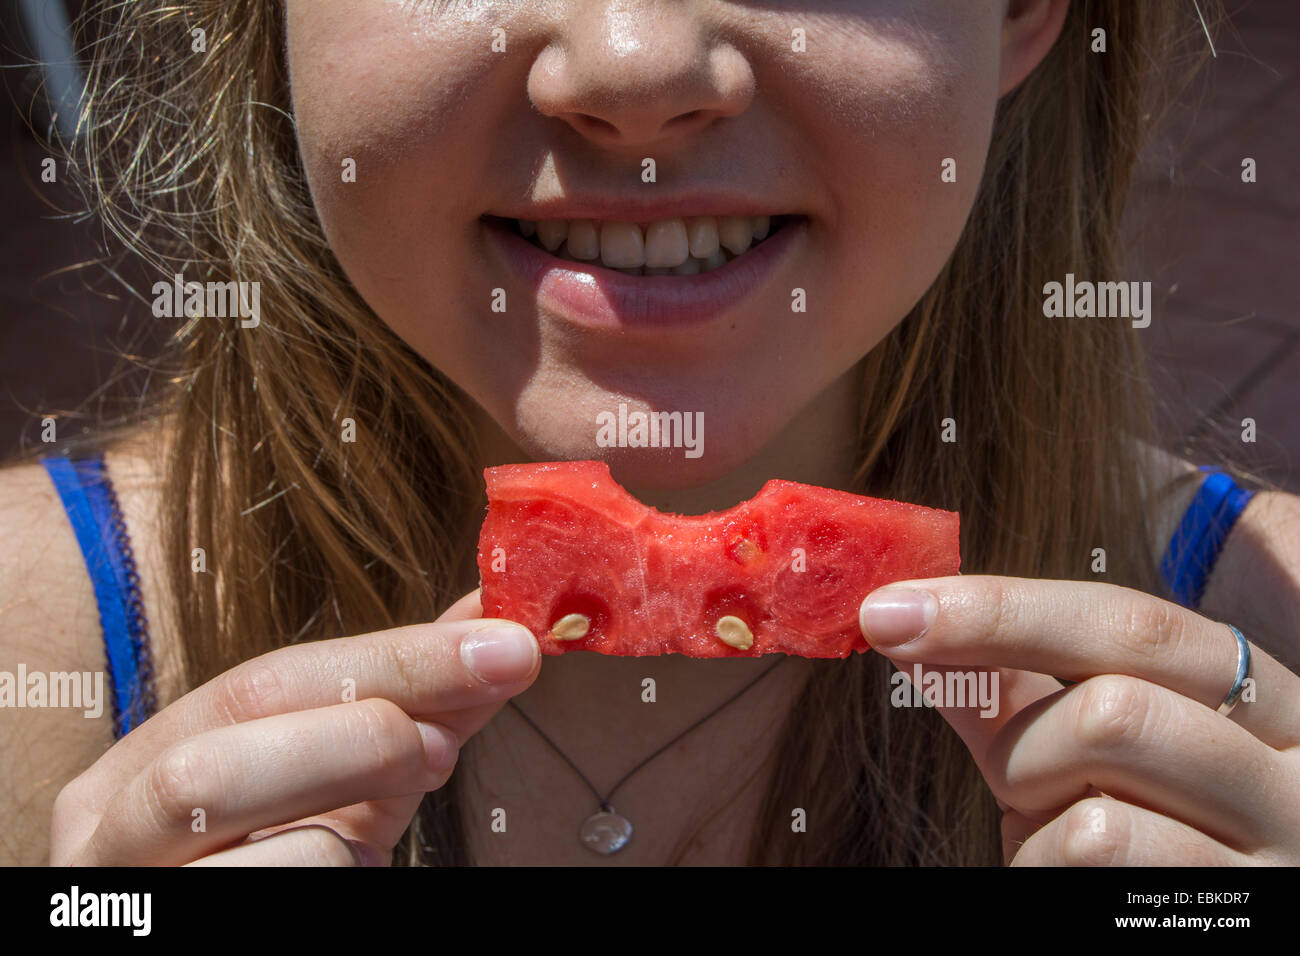 A girl holding a piece of watermelon with a bite out of it Stock Photo